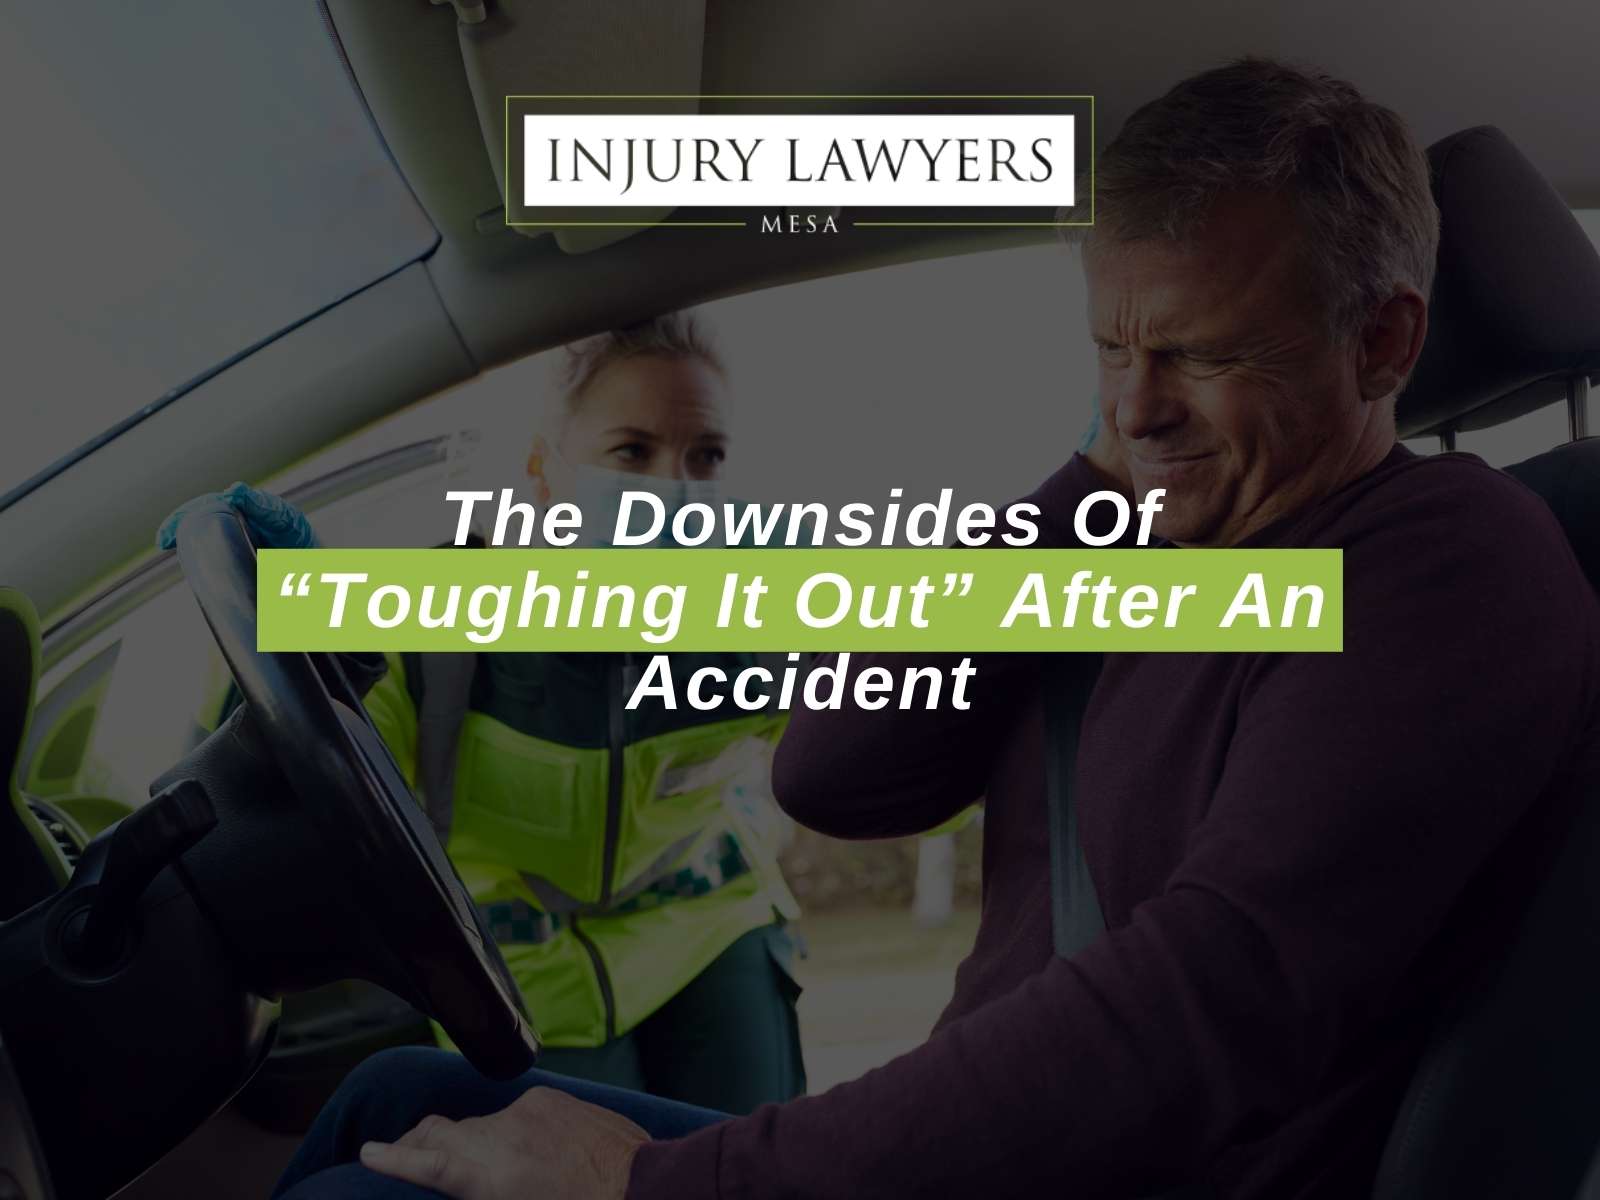 The Downsides Of “Toughing It Out” After An Accident